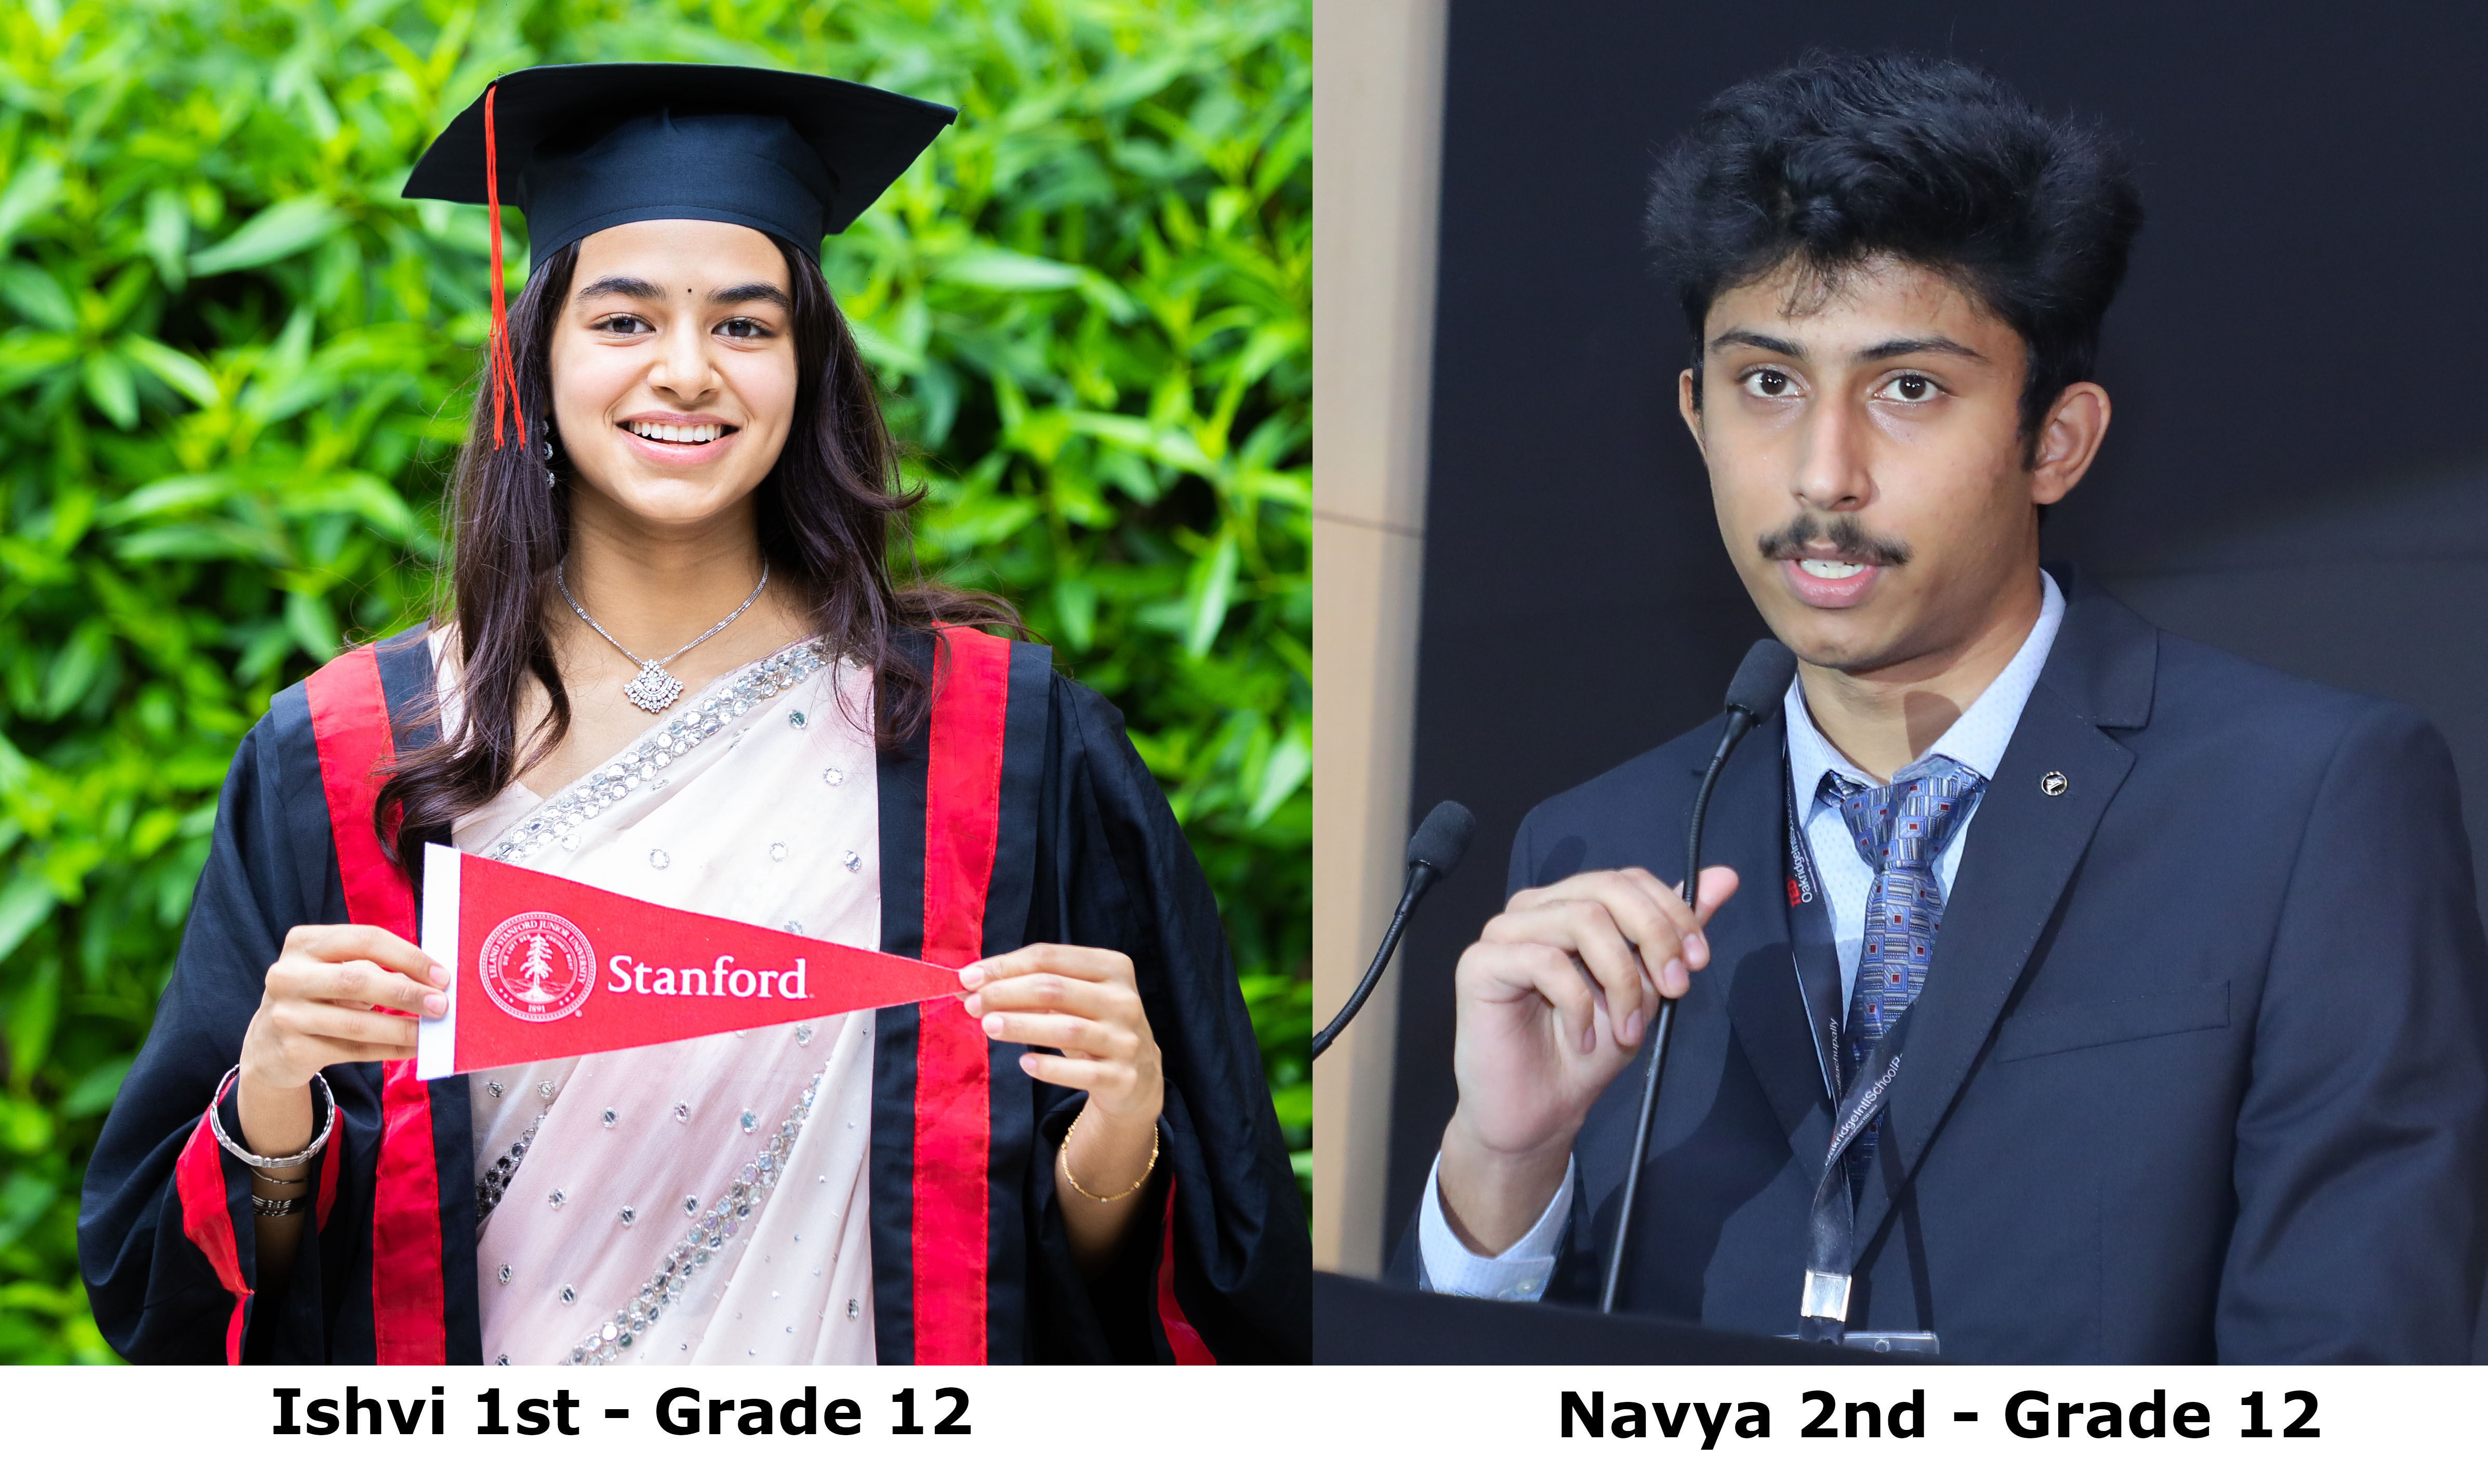 Oakridge Bachupally celebrates the outstanding results of their students in CBSE Grade 10 & 12 Exams